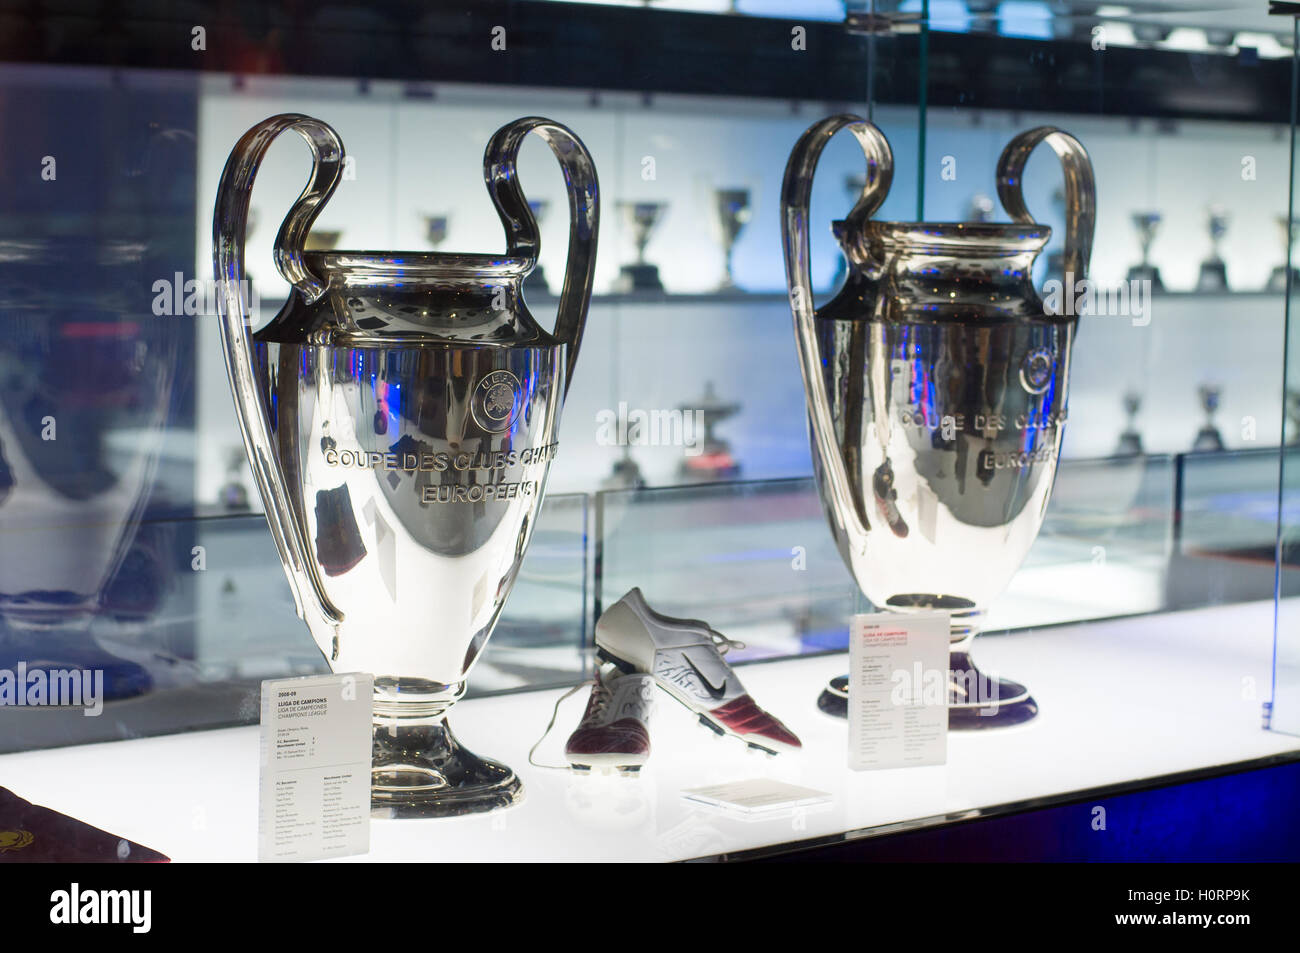 BARCELONA - SEPTEMBER 22, 2014: UEFA Champions League Cup in museum. UEFA  Cup - trophy awarded annually by UEFA Stock Photo - Alamy